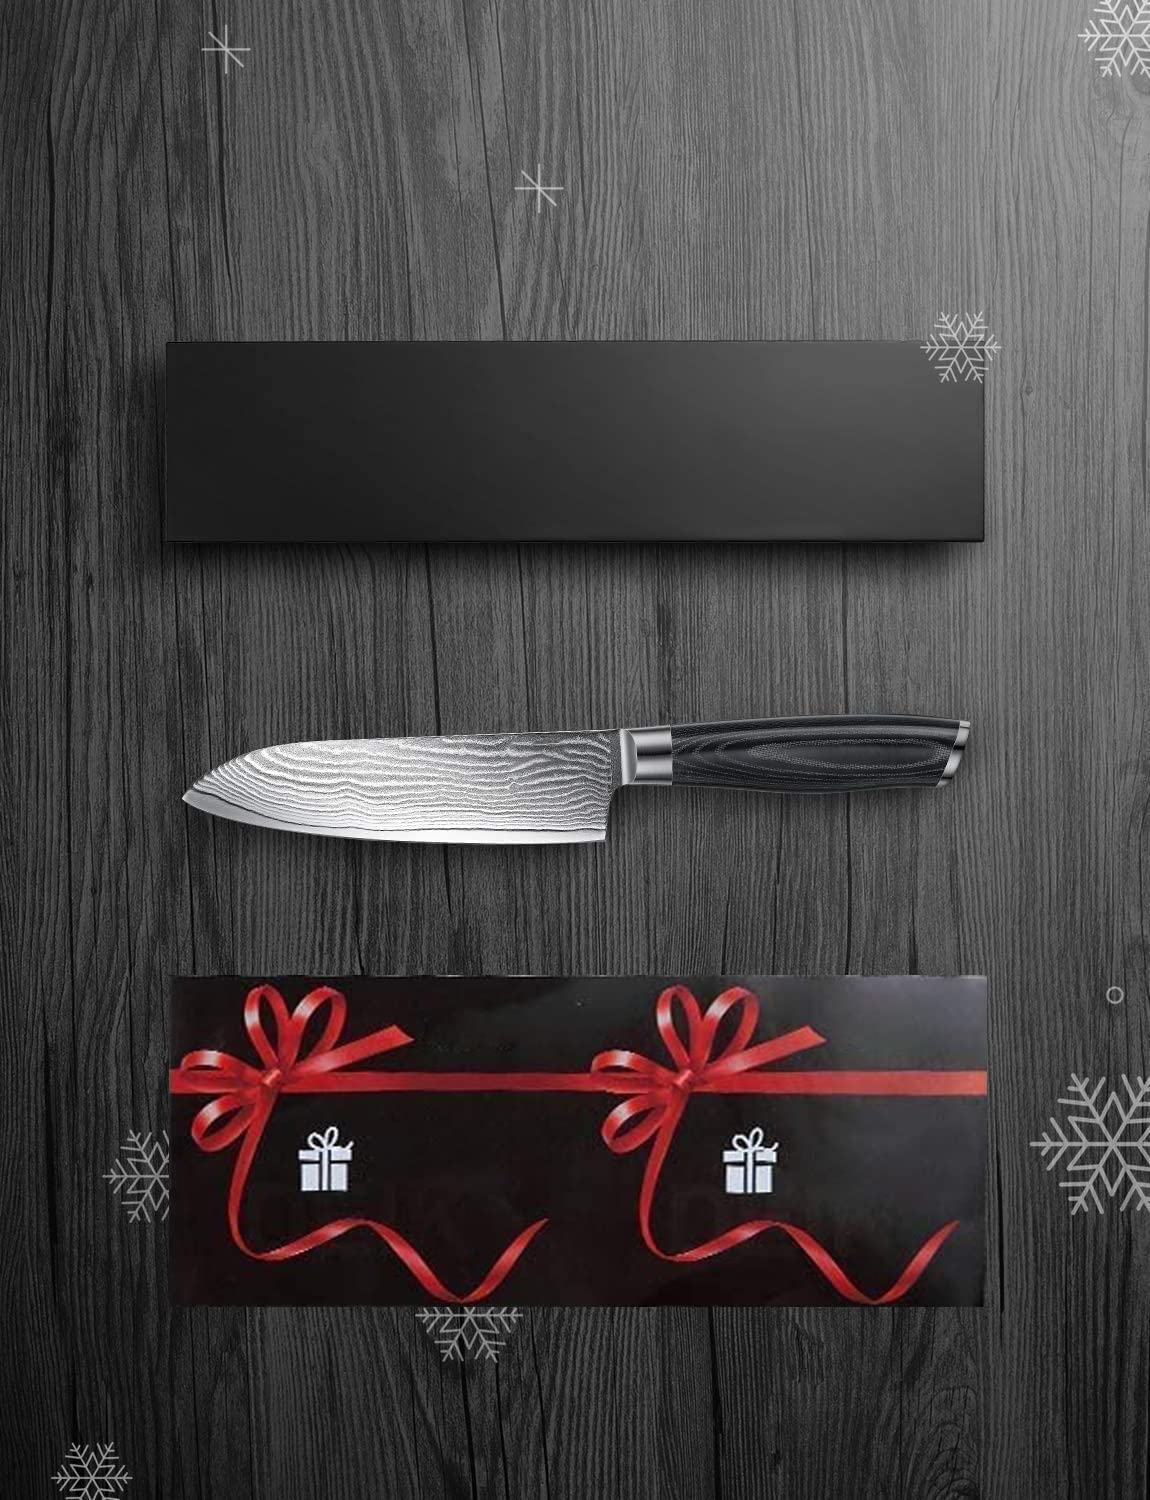 DEIK Santoku Damascus Knife, 17 cm Blade, Chef's Knife, 67 Layers, Made of Genuine Japanese VG10 Damascus Steel, Ergonomic Wooden Handle with Exquisite Gift Box